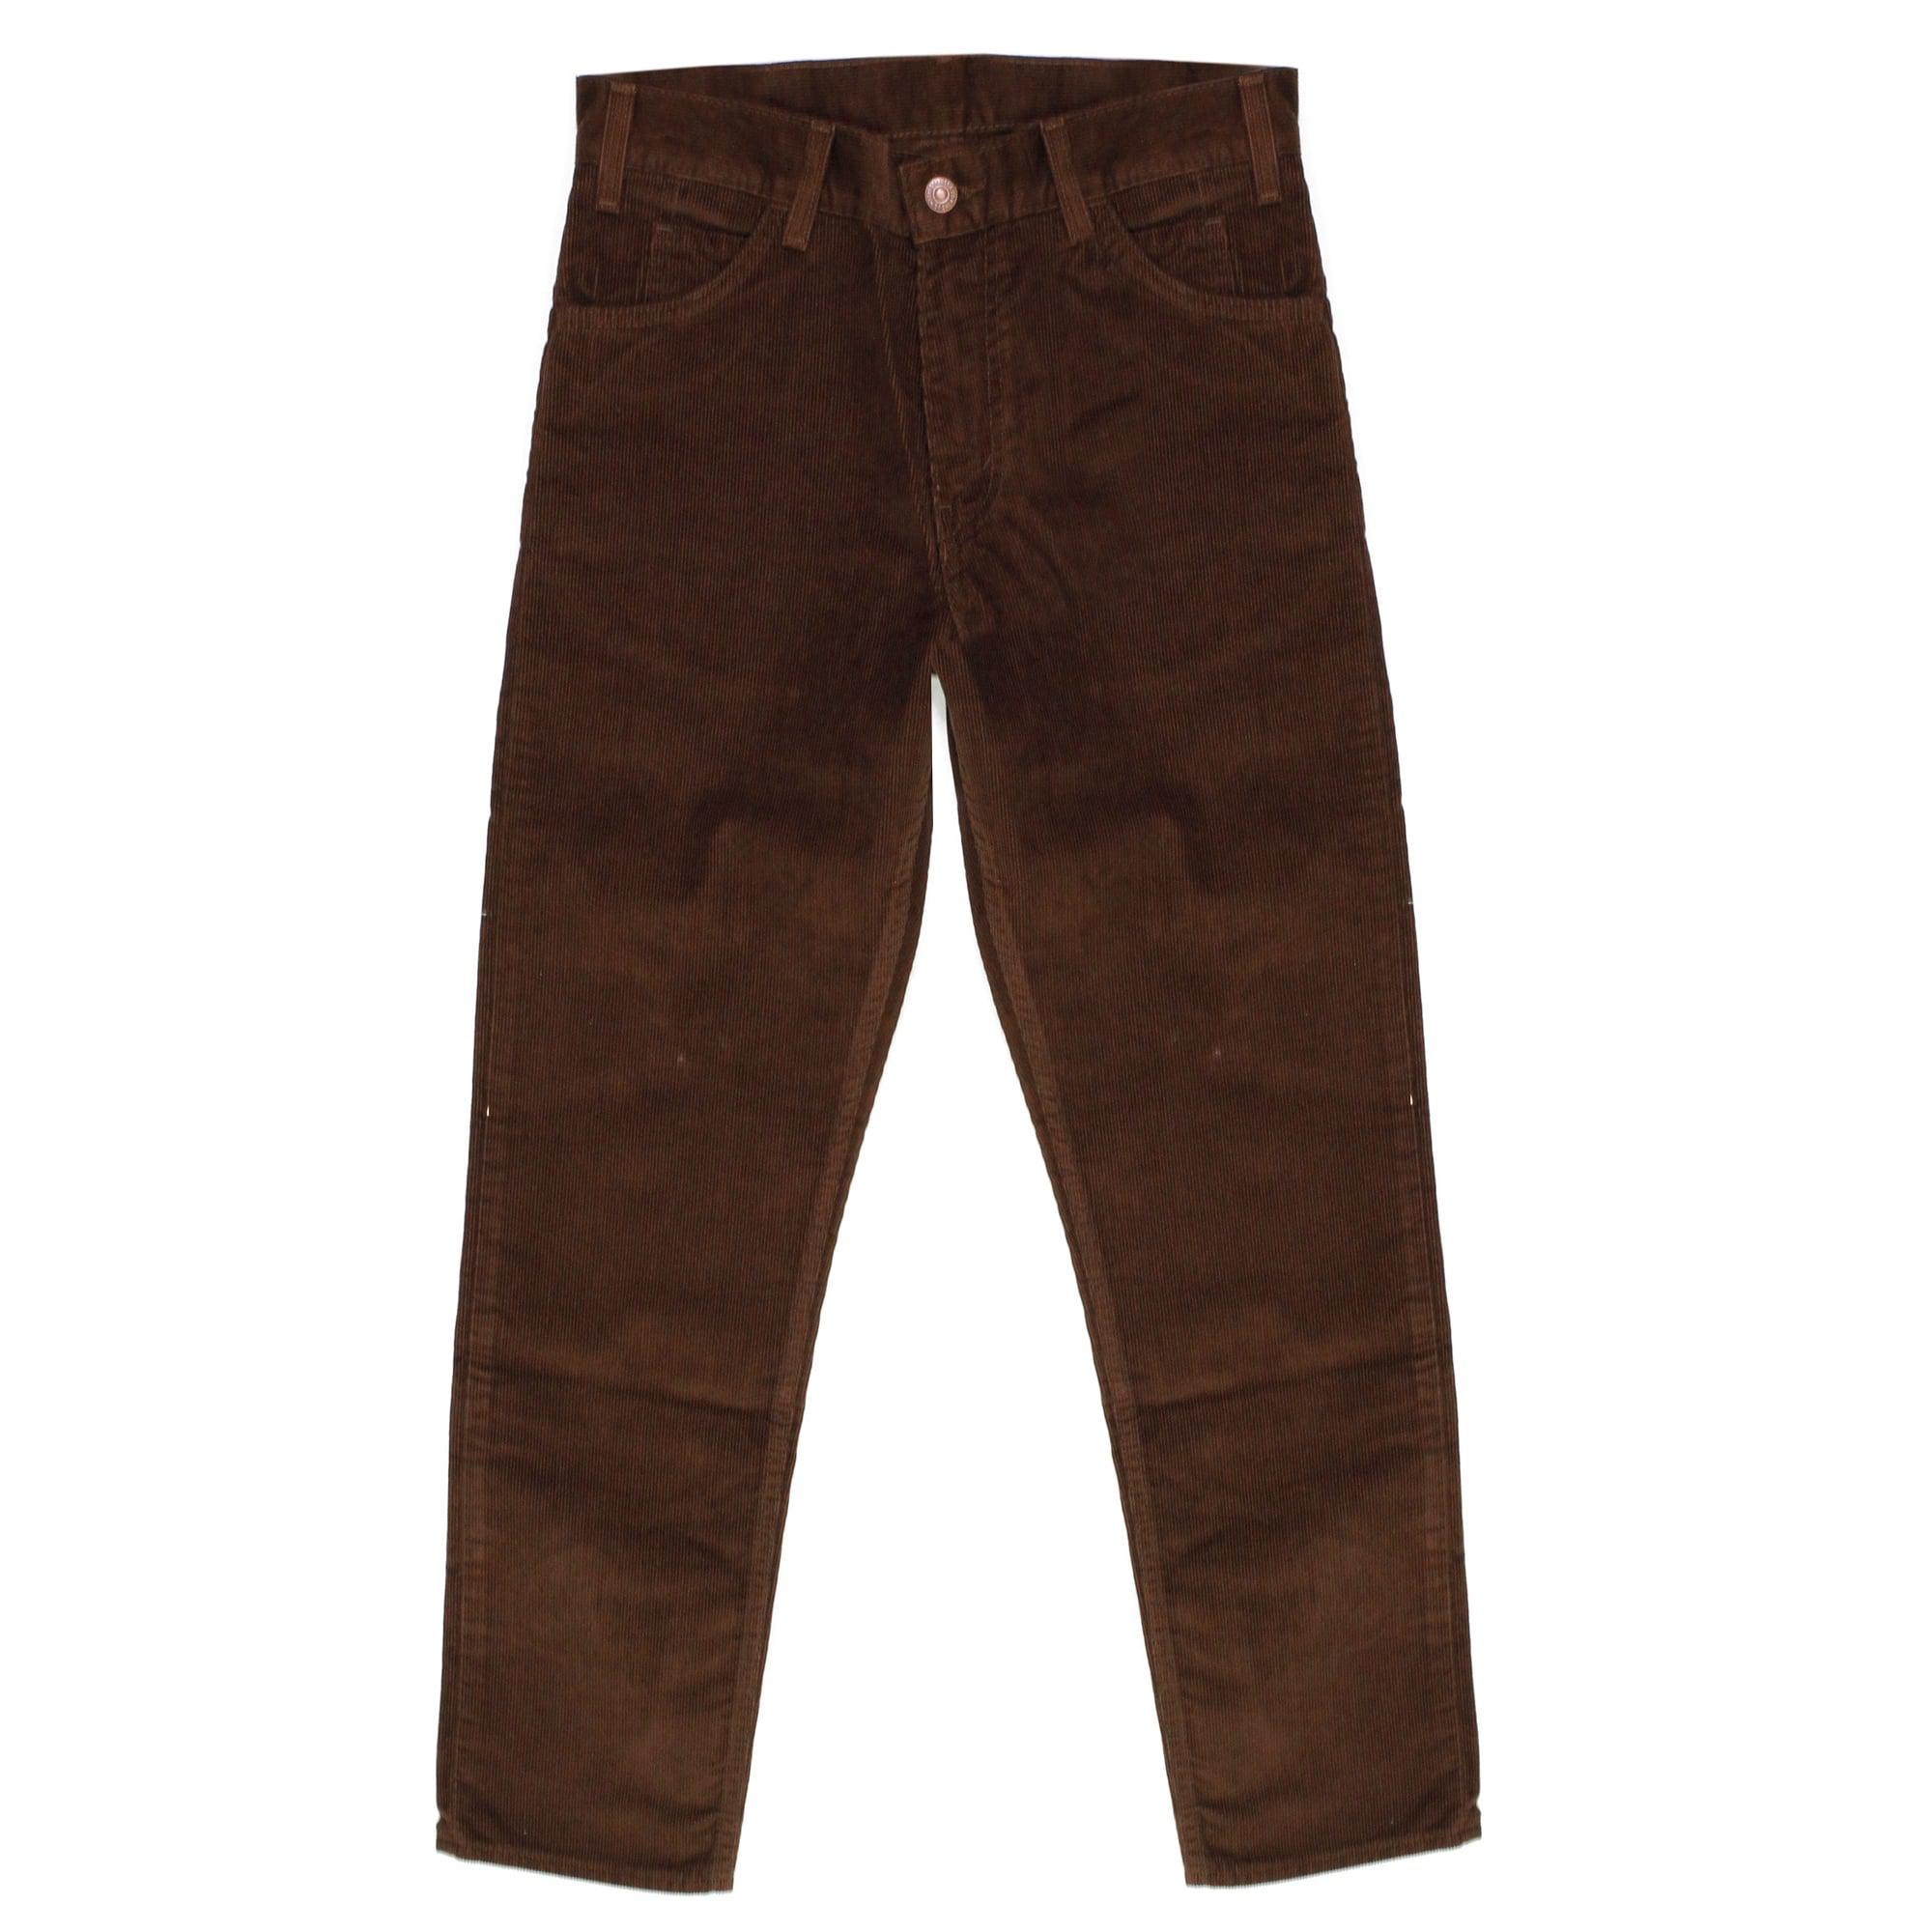 Levi's Levi'S Vintage Corduroy Chocolate Trousers 29189-0002 in Brown ...